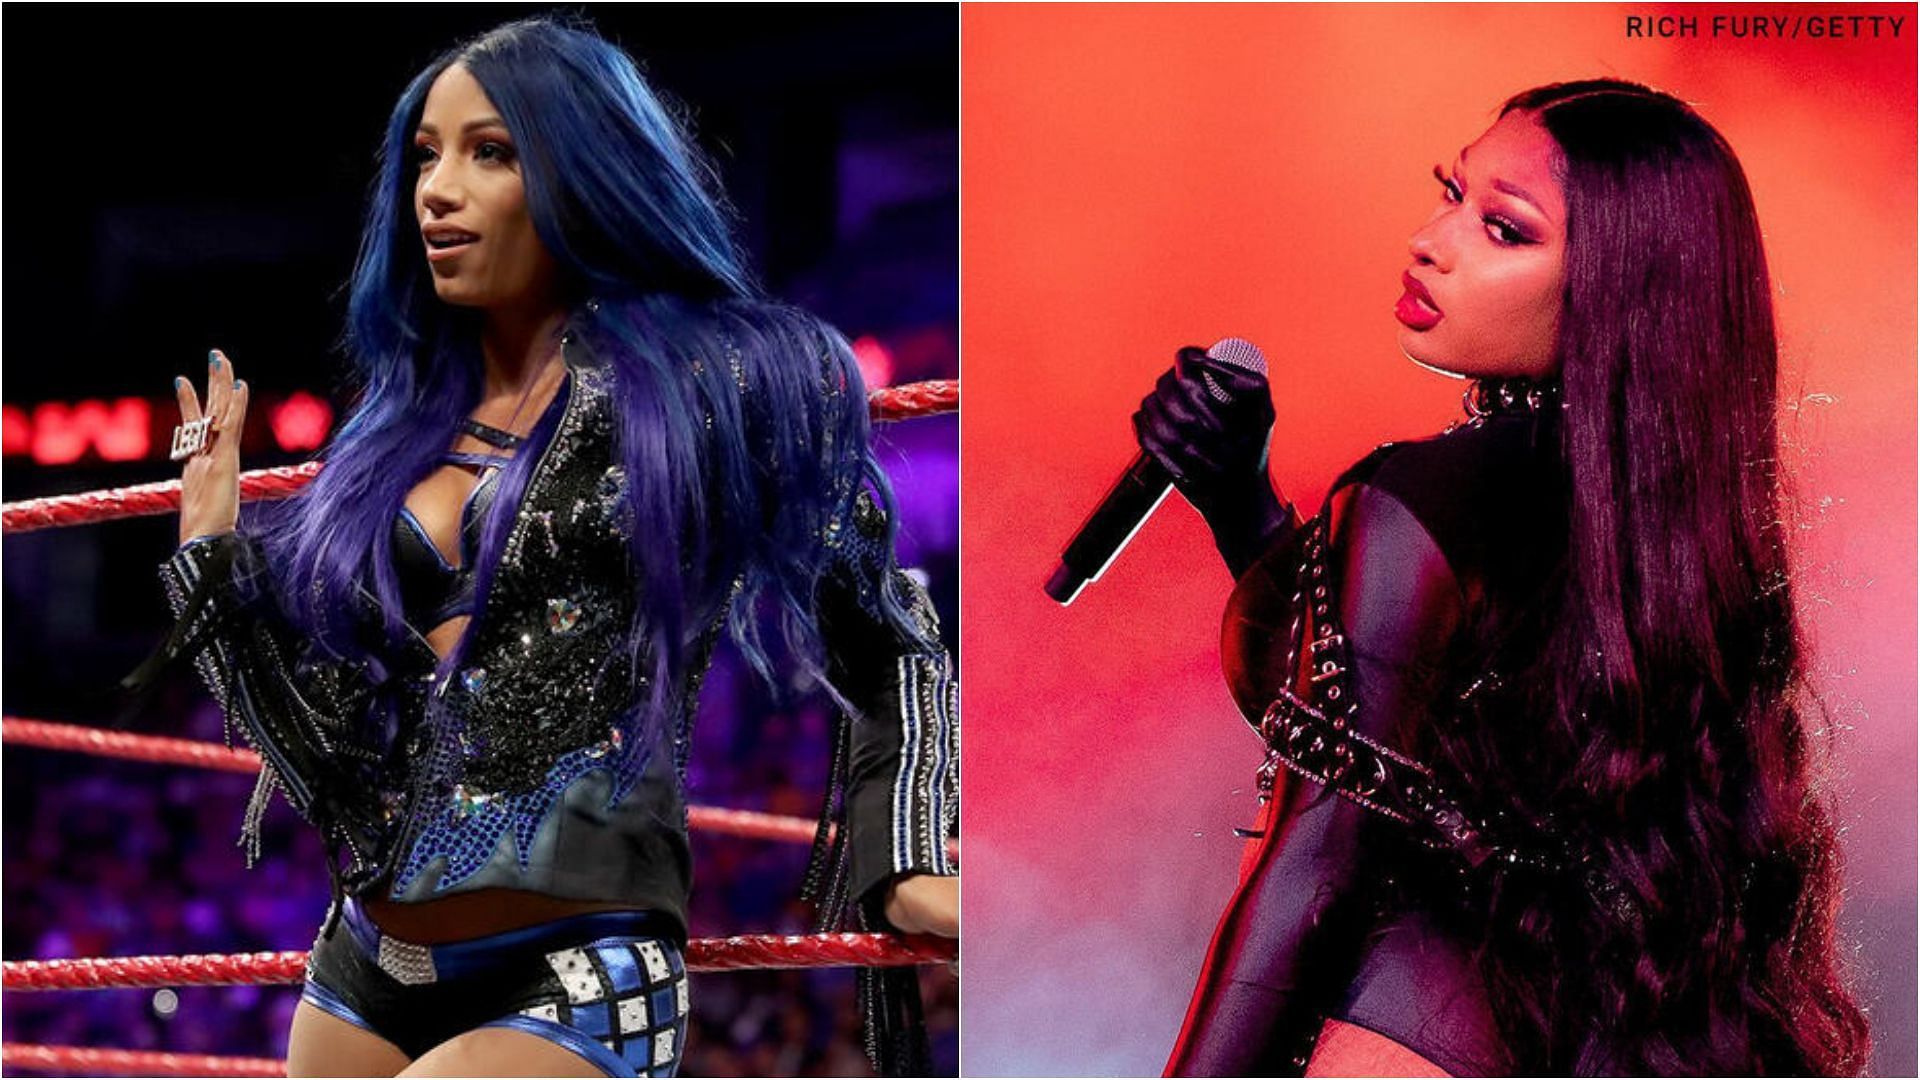 WWE had plans for Mercedes Mone and Megan Thee Stallion some years ago.